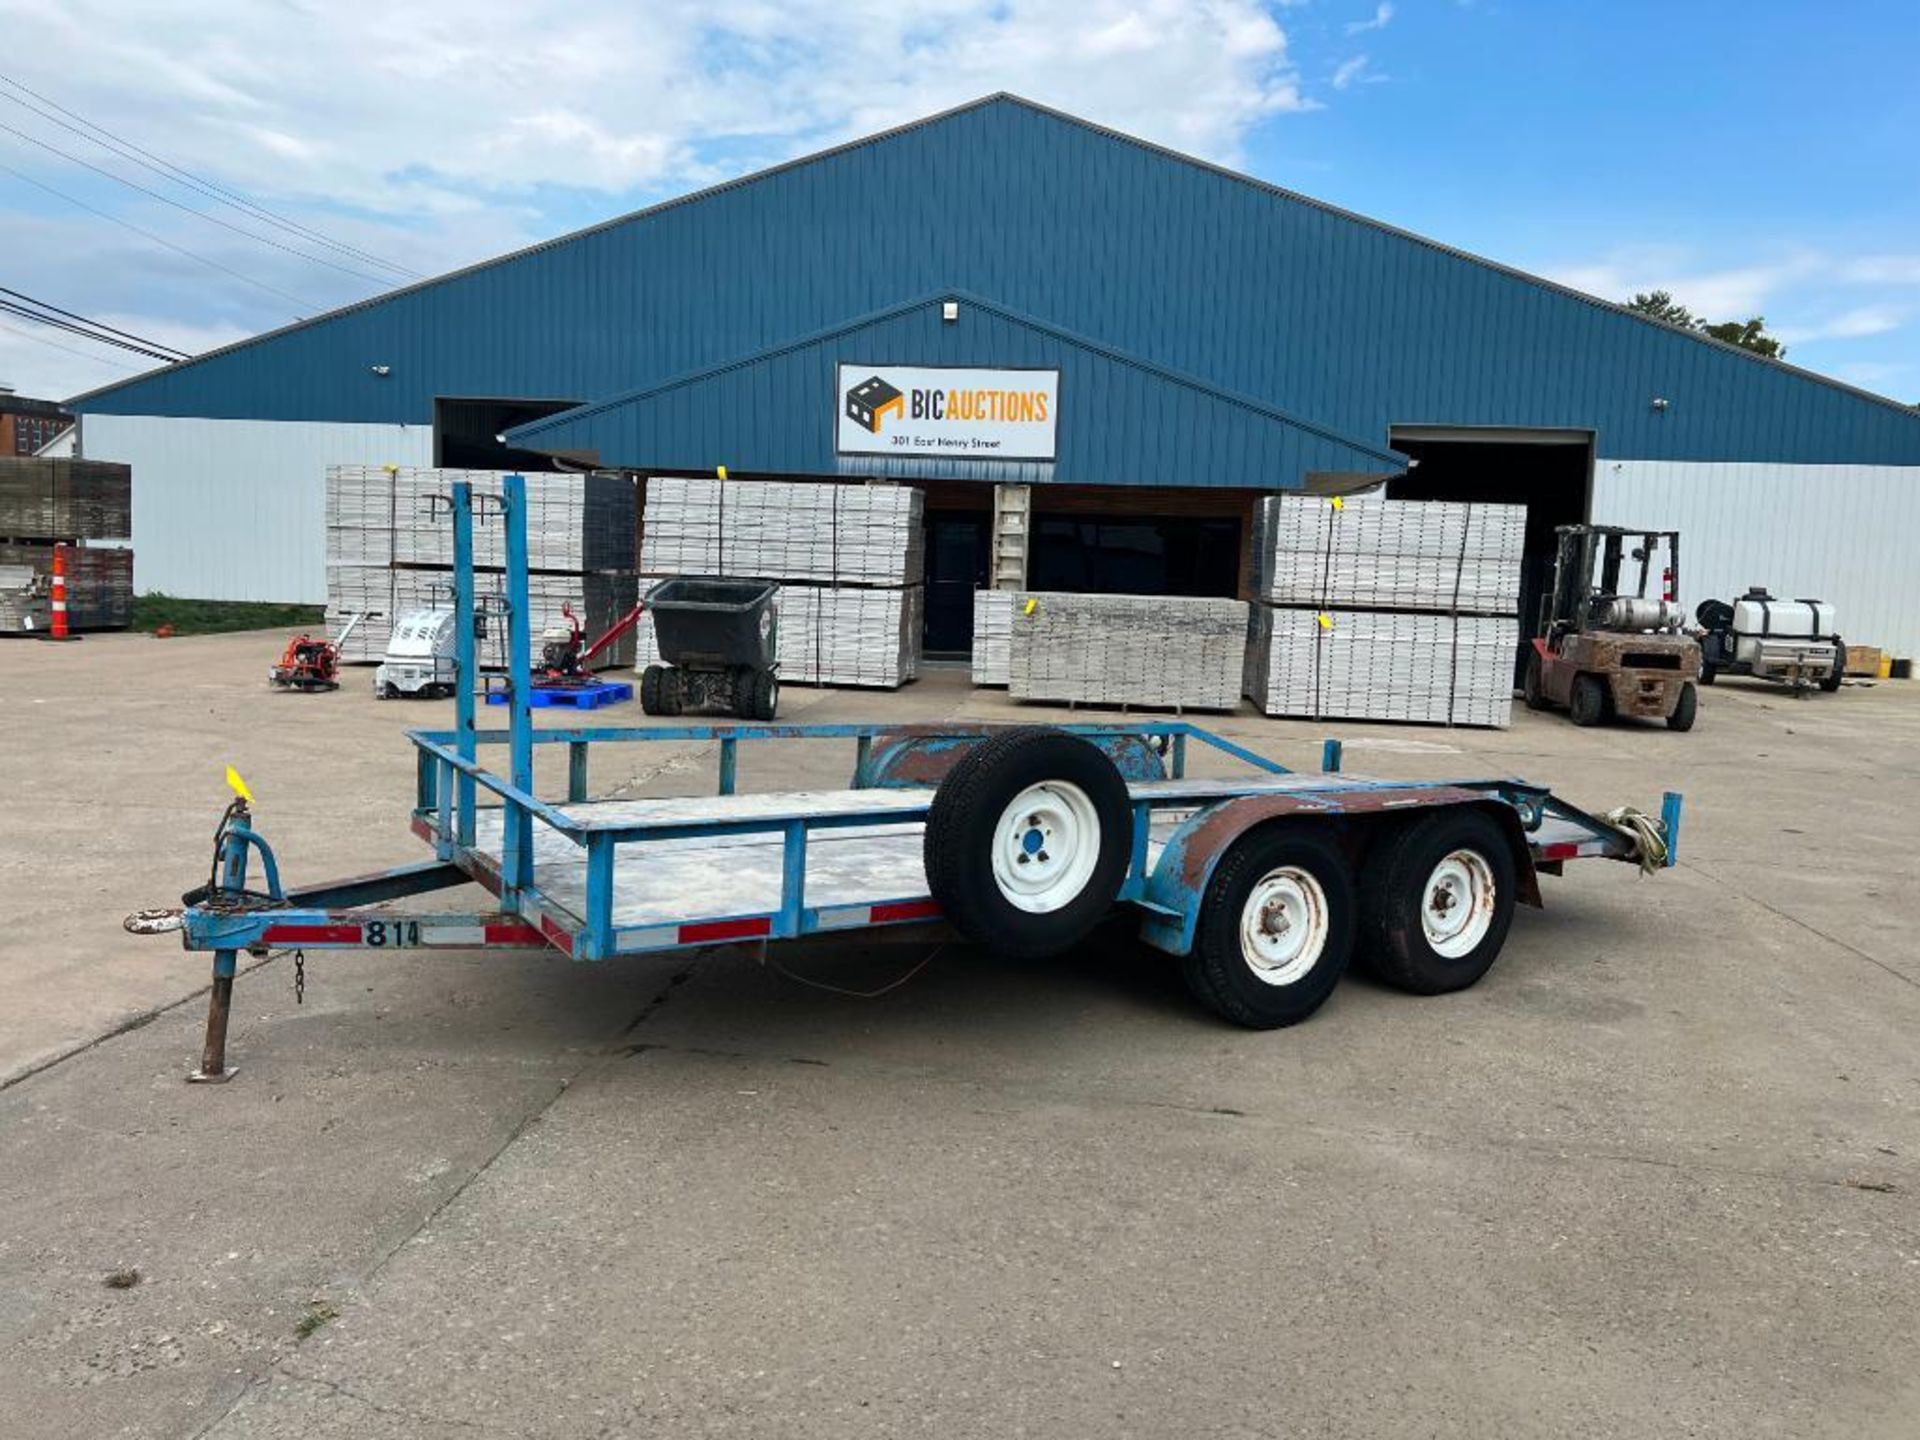 1988 Brewer Utility Trailer, VIN #068814, Flatbed 16' x 76", Dual Axle with Spare Tire & Pintail Rin